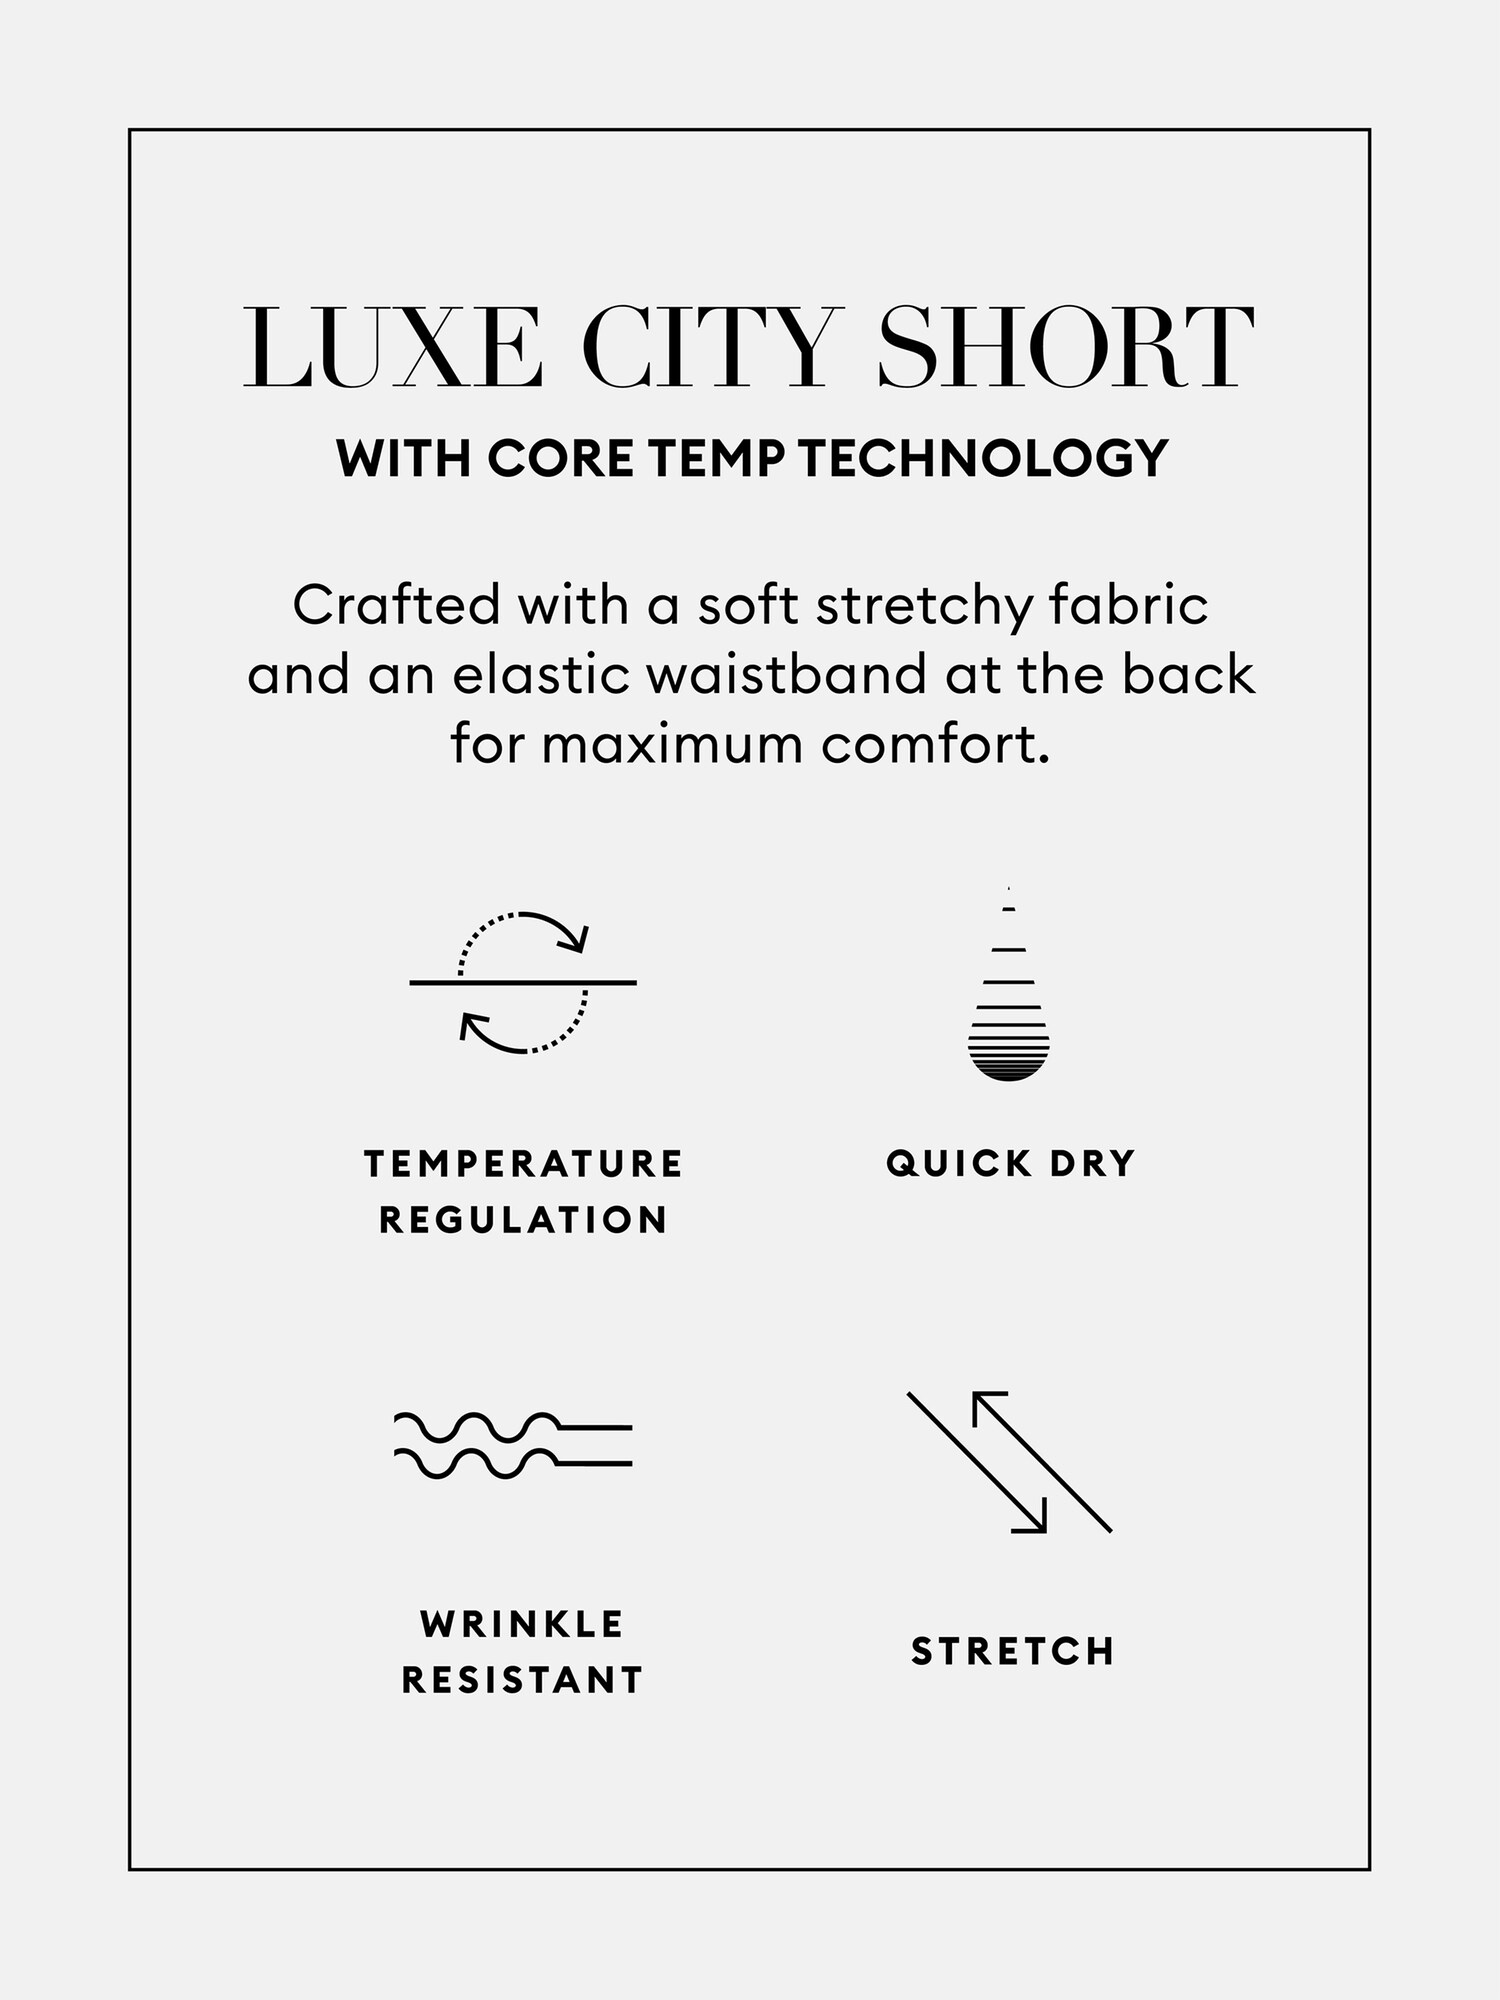 9" LUXE City Short with Core Temp Technology